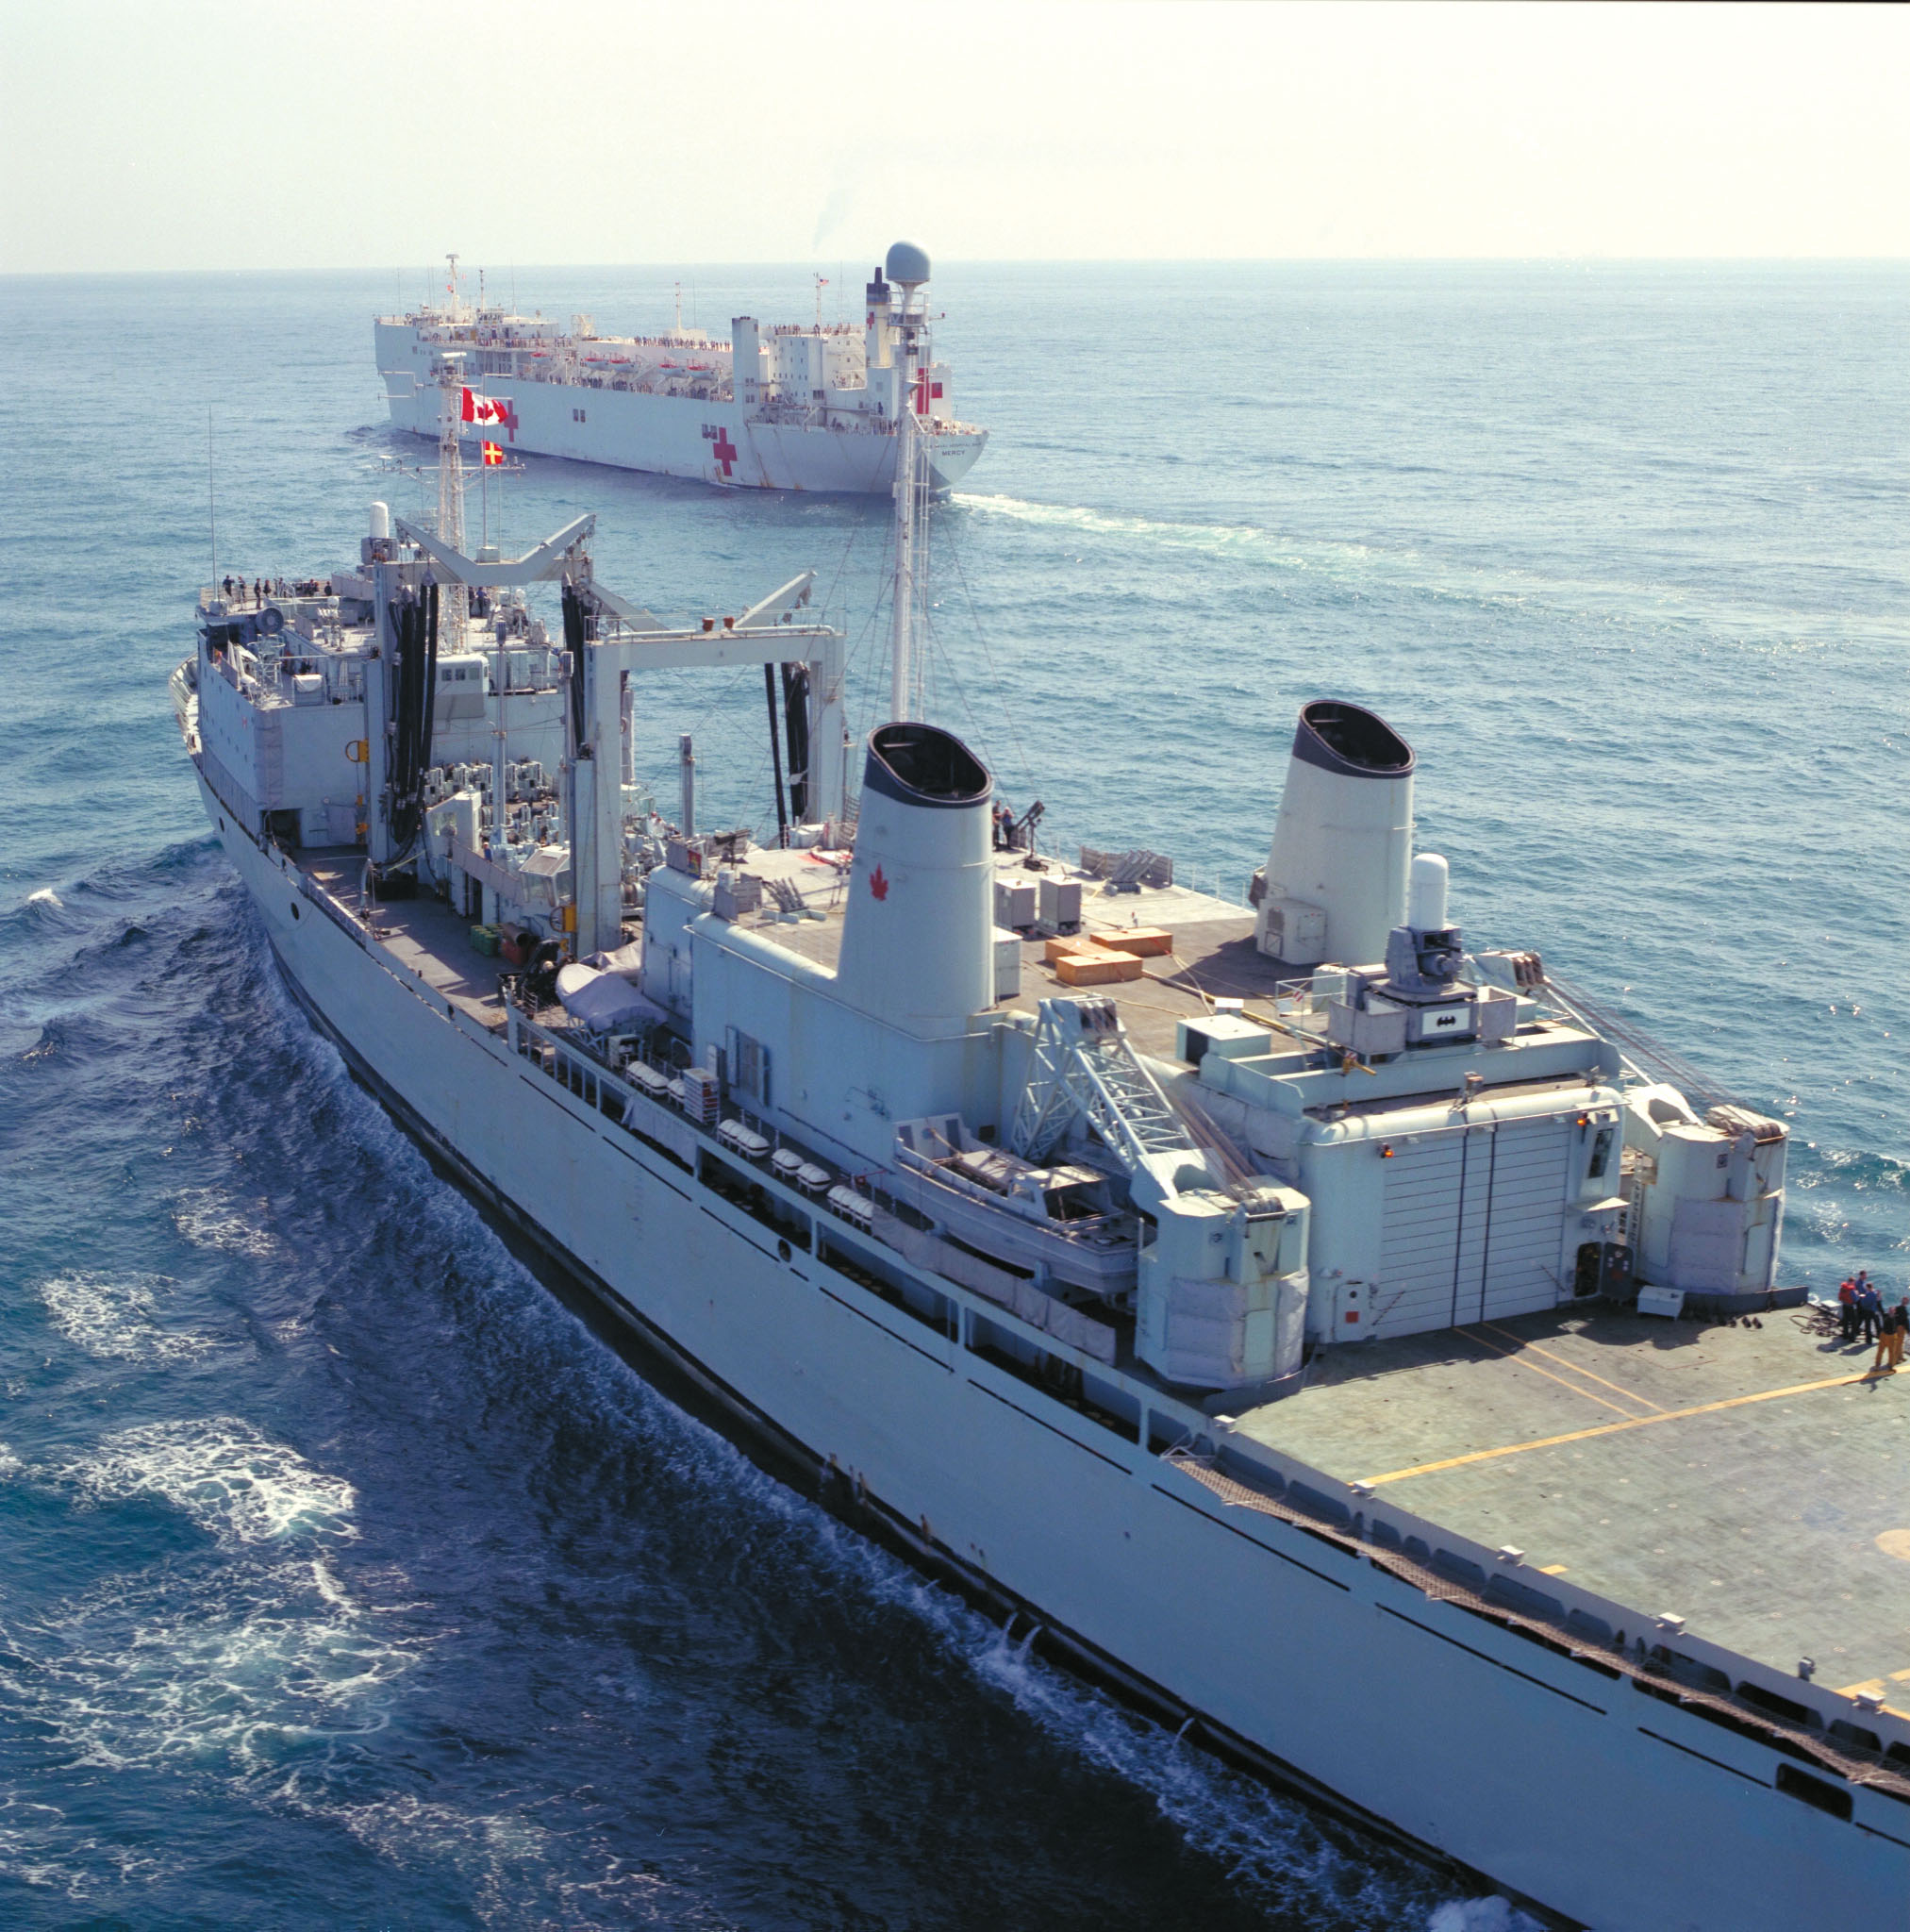 View of HMCS Protecteur and HMC Mercy at sea.